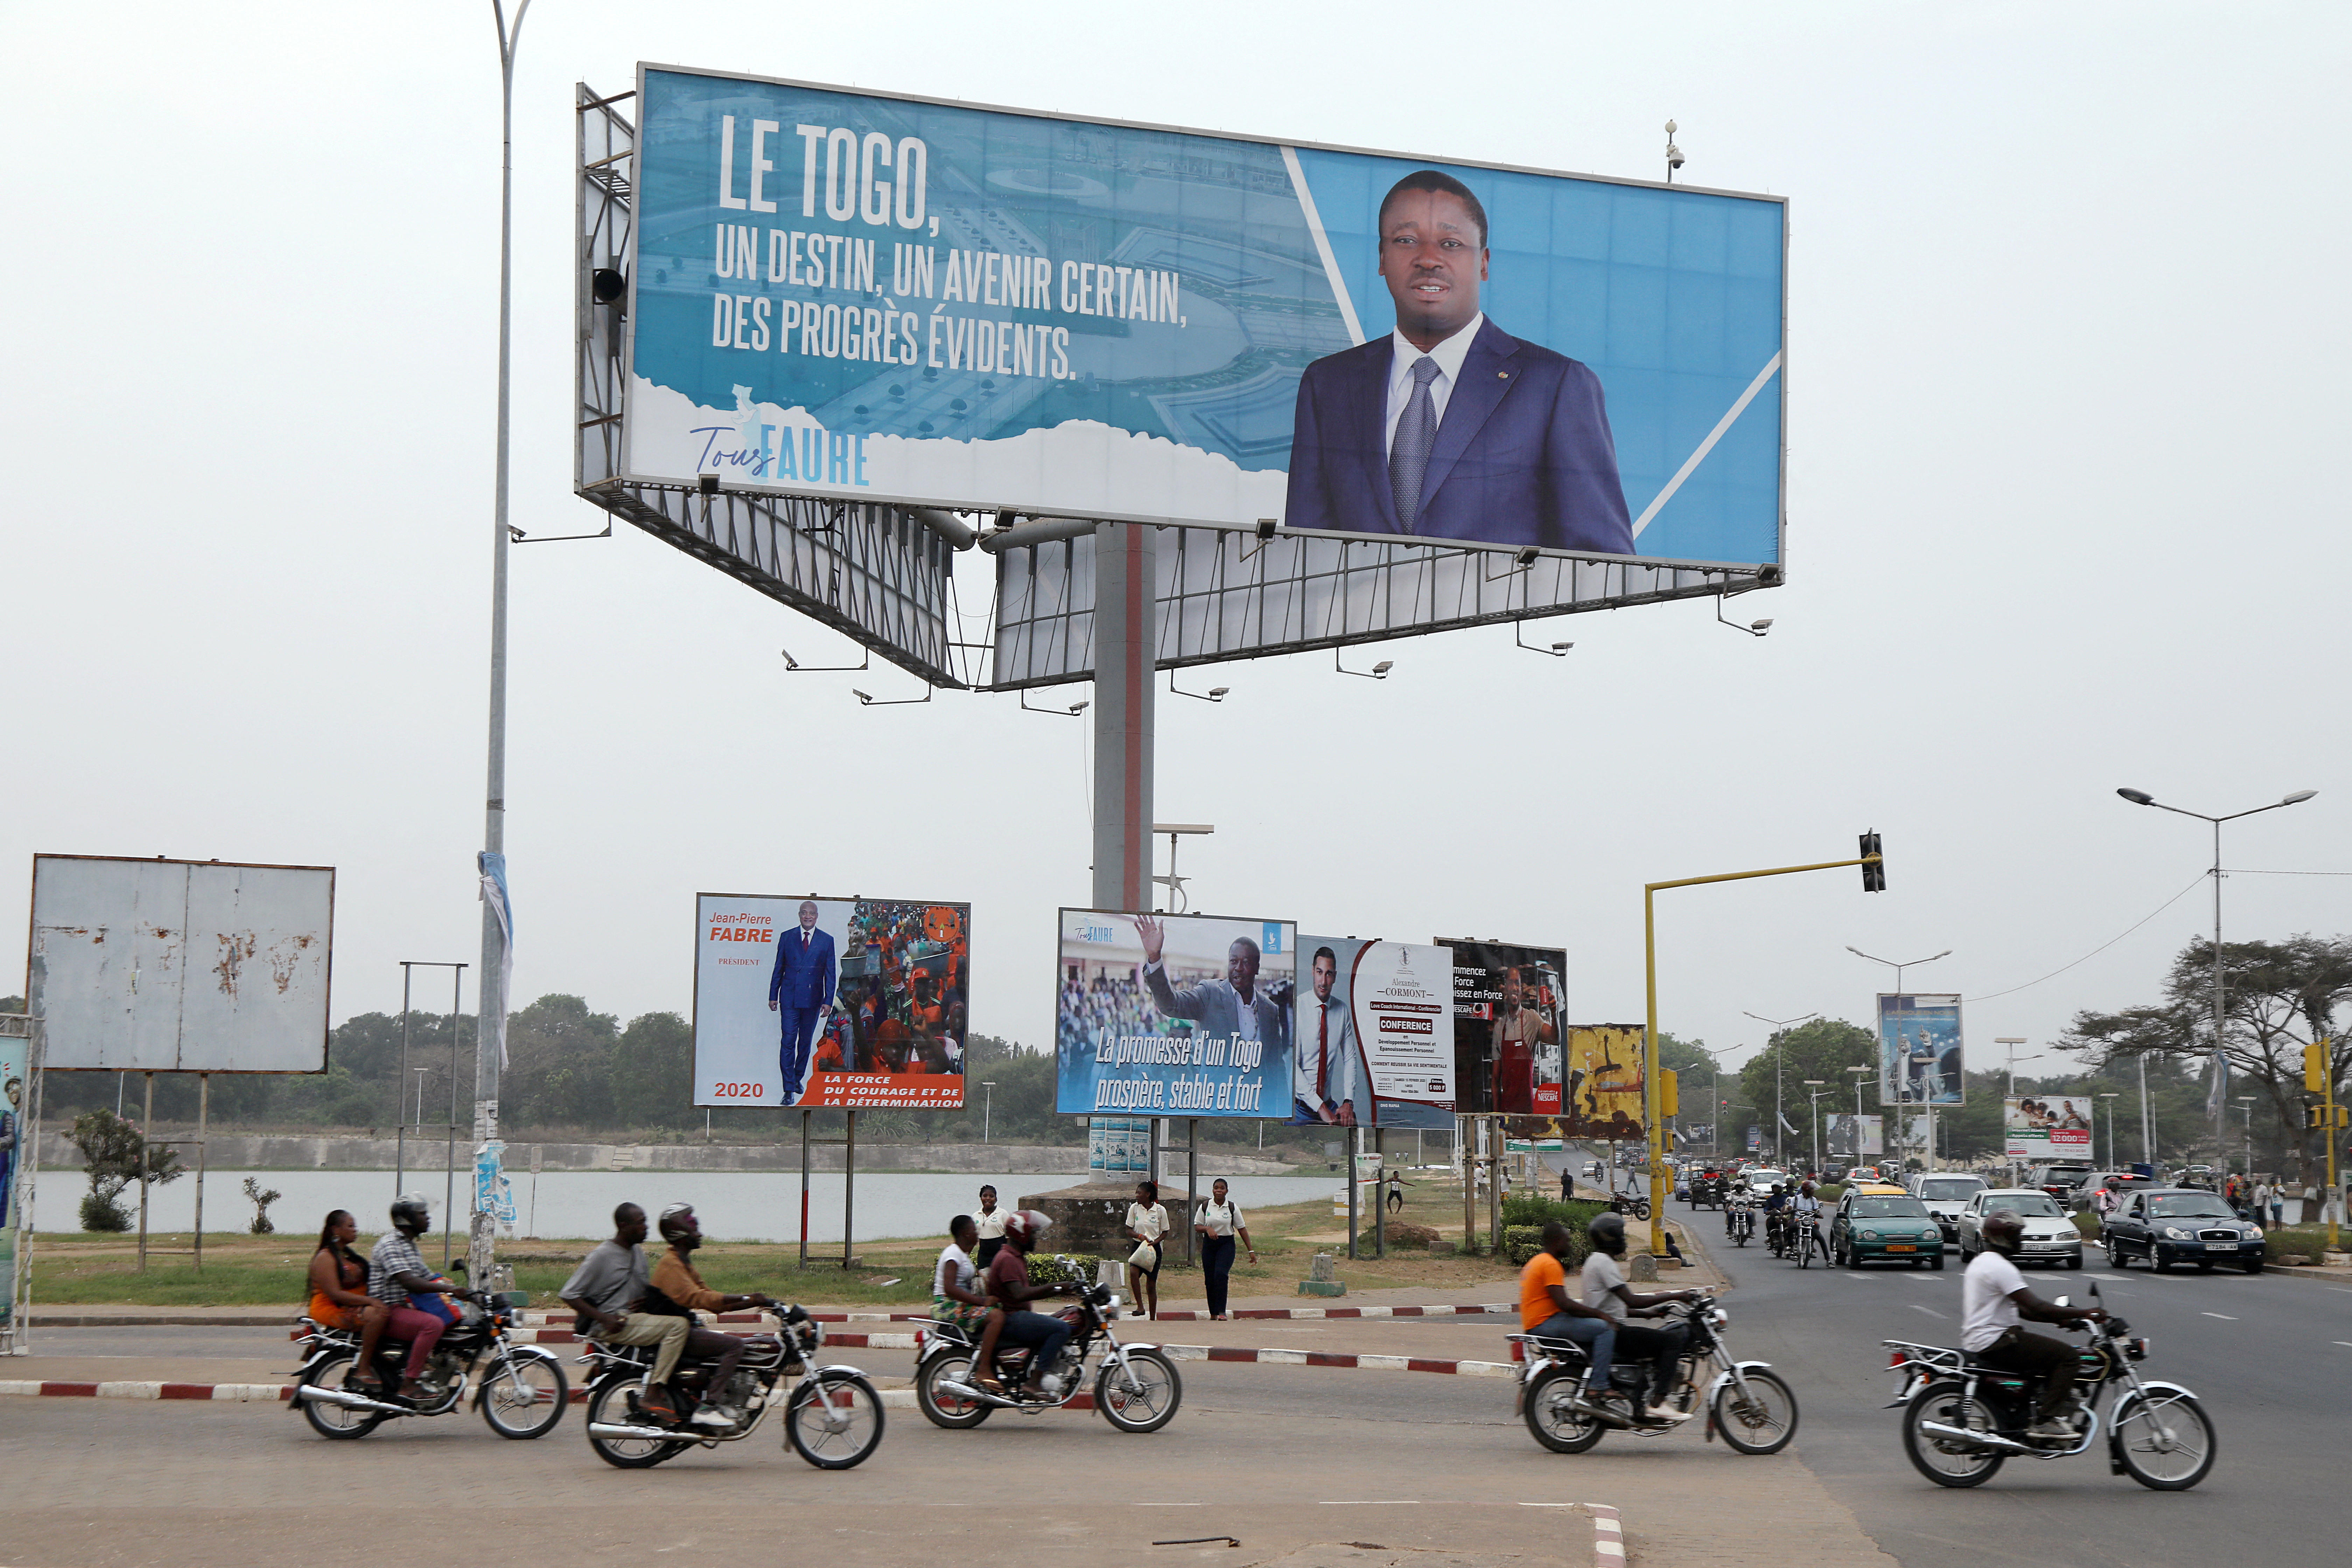 A billboard of presidential candidate of UNIR Gnassingbe is pictured on a street in Lome